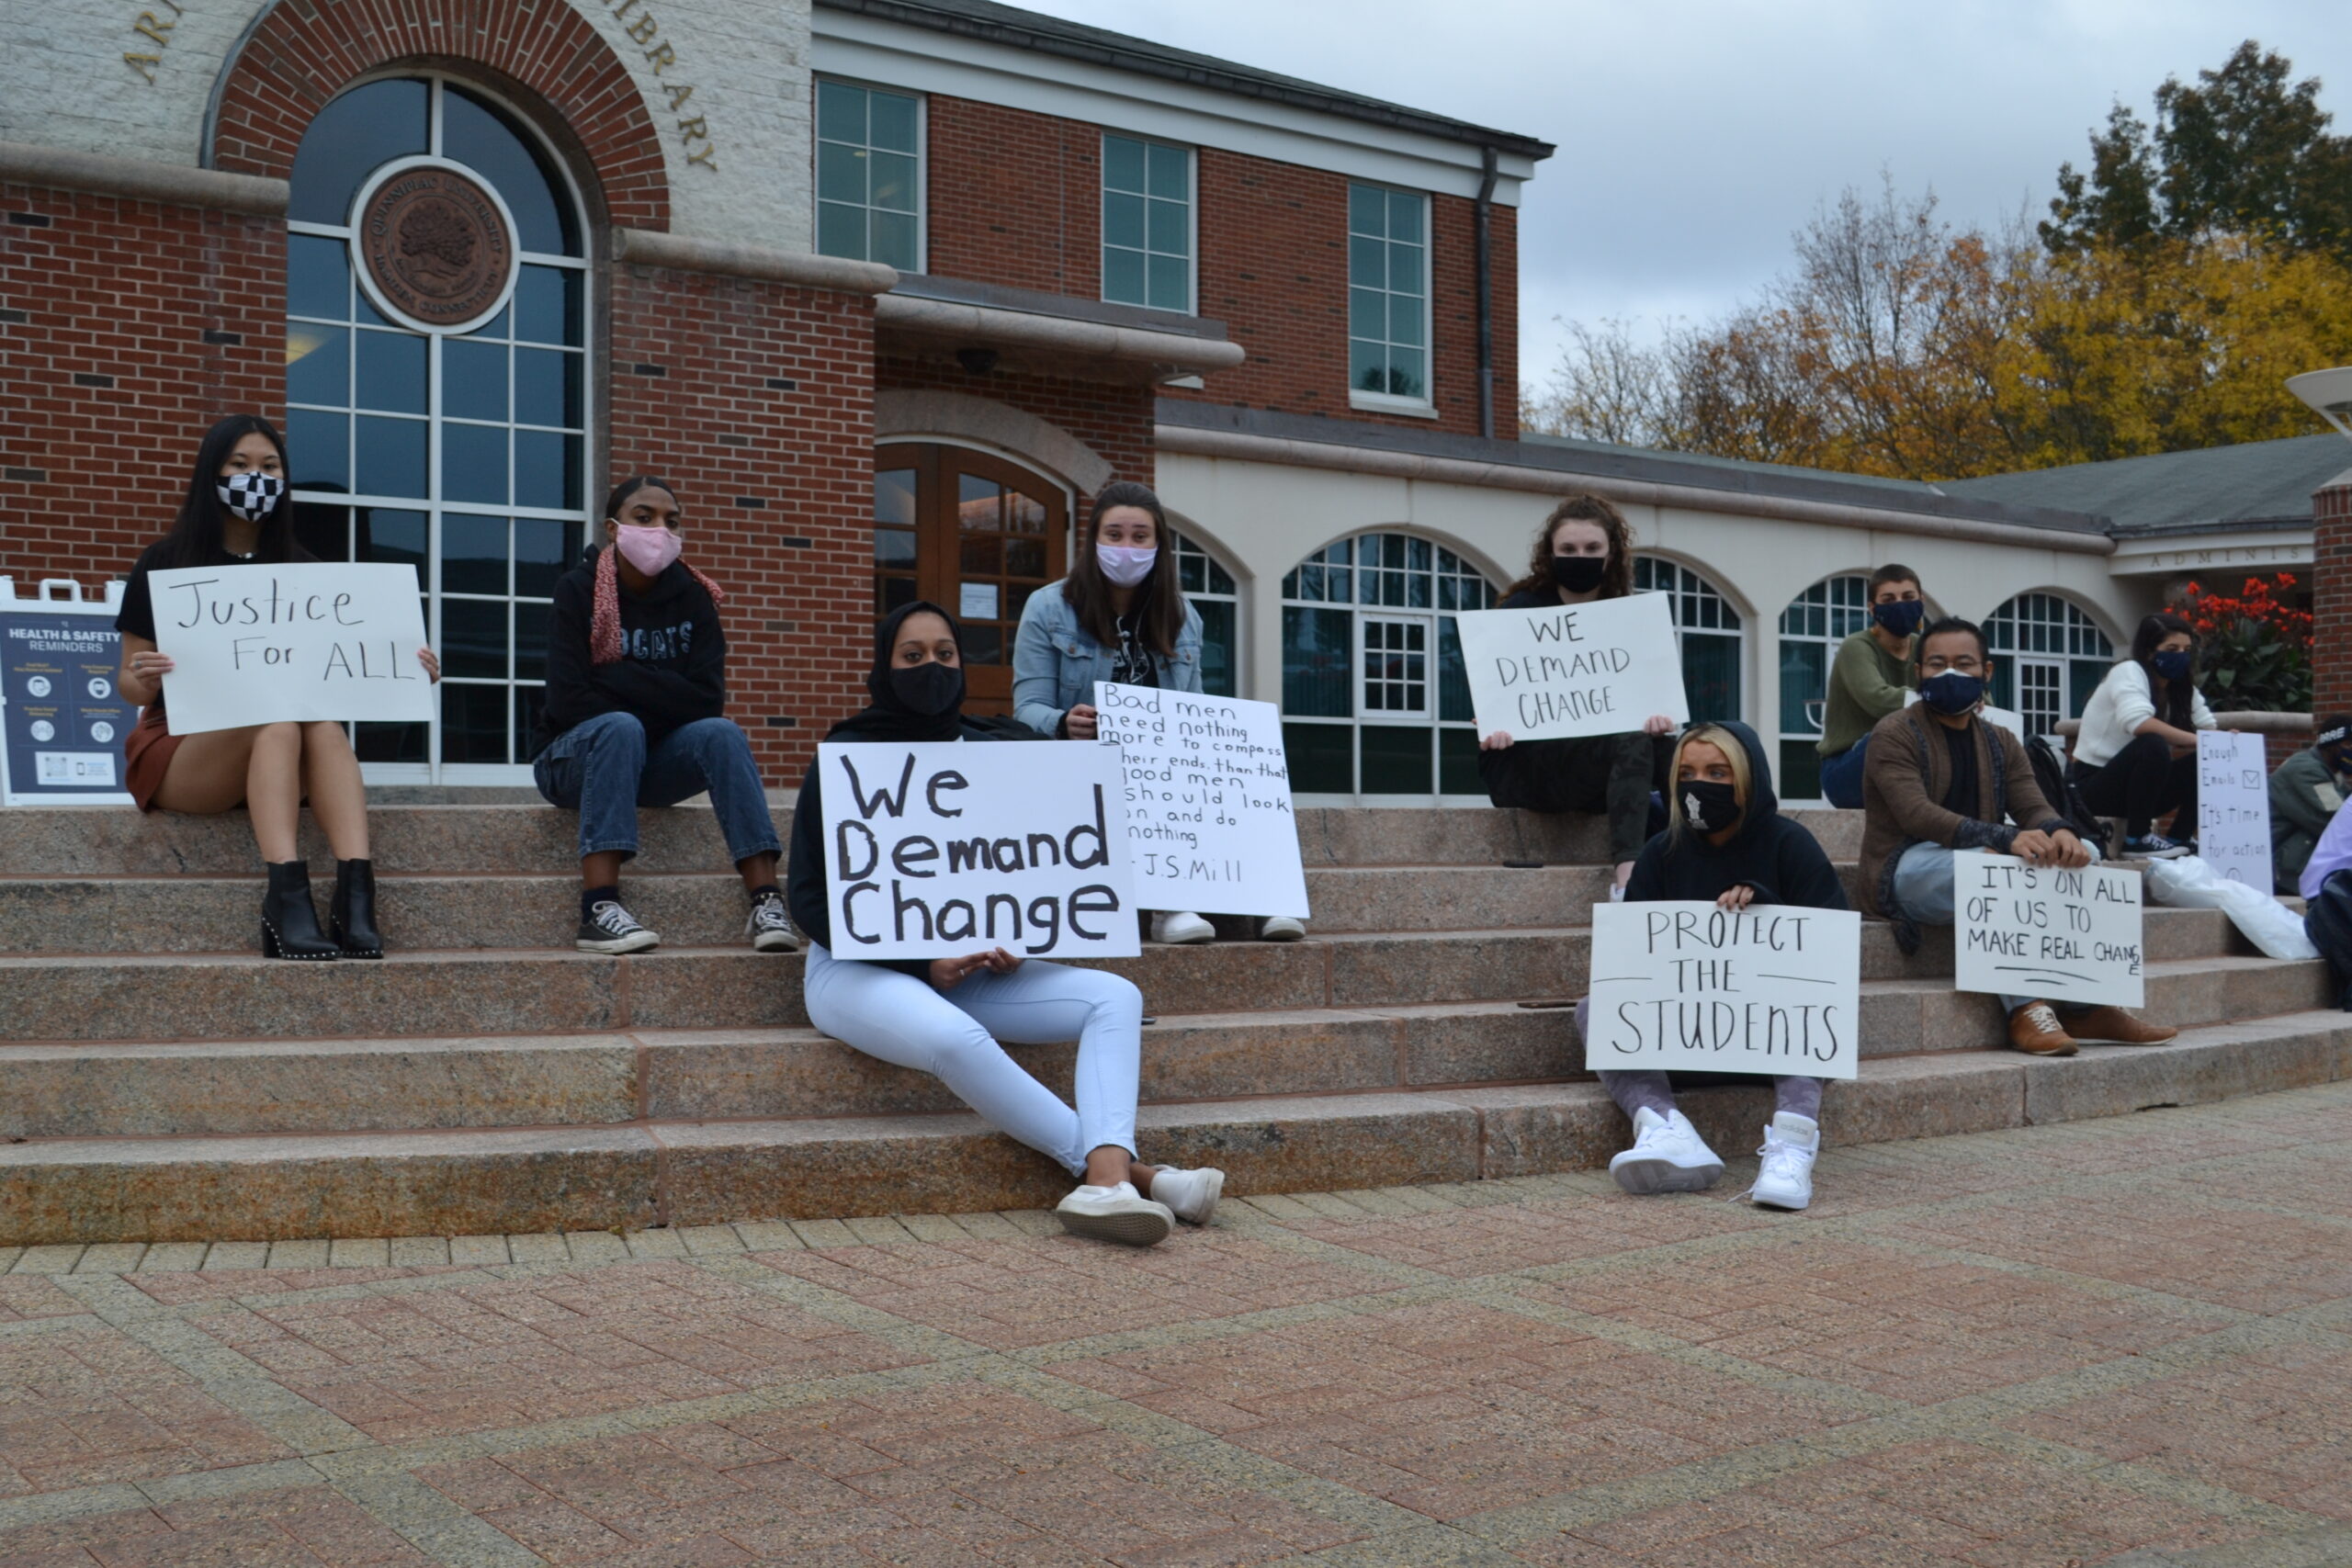 Quinnipiac students protesting on the library steps on the quad on Wednesday, Oct. 21. The protest lasted more than four hours, with multiple students subbing in and out if they had to go to class. (Photo by Owen Doody)